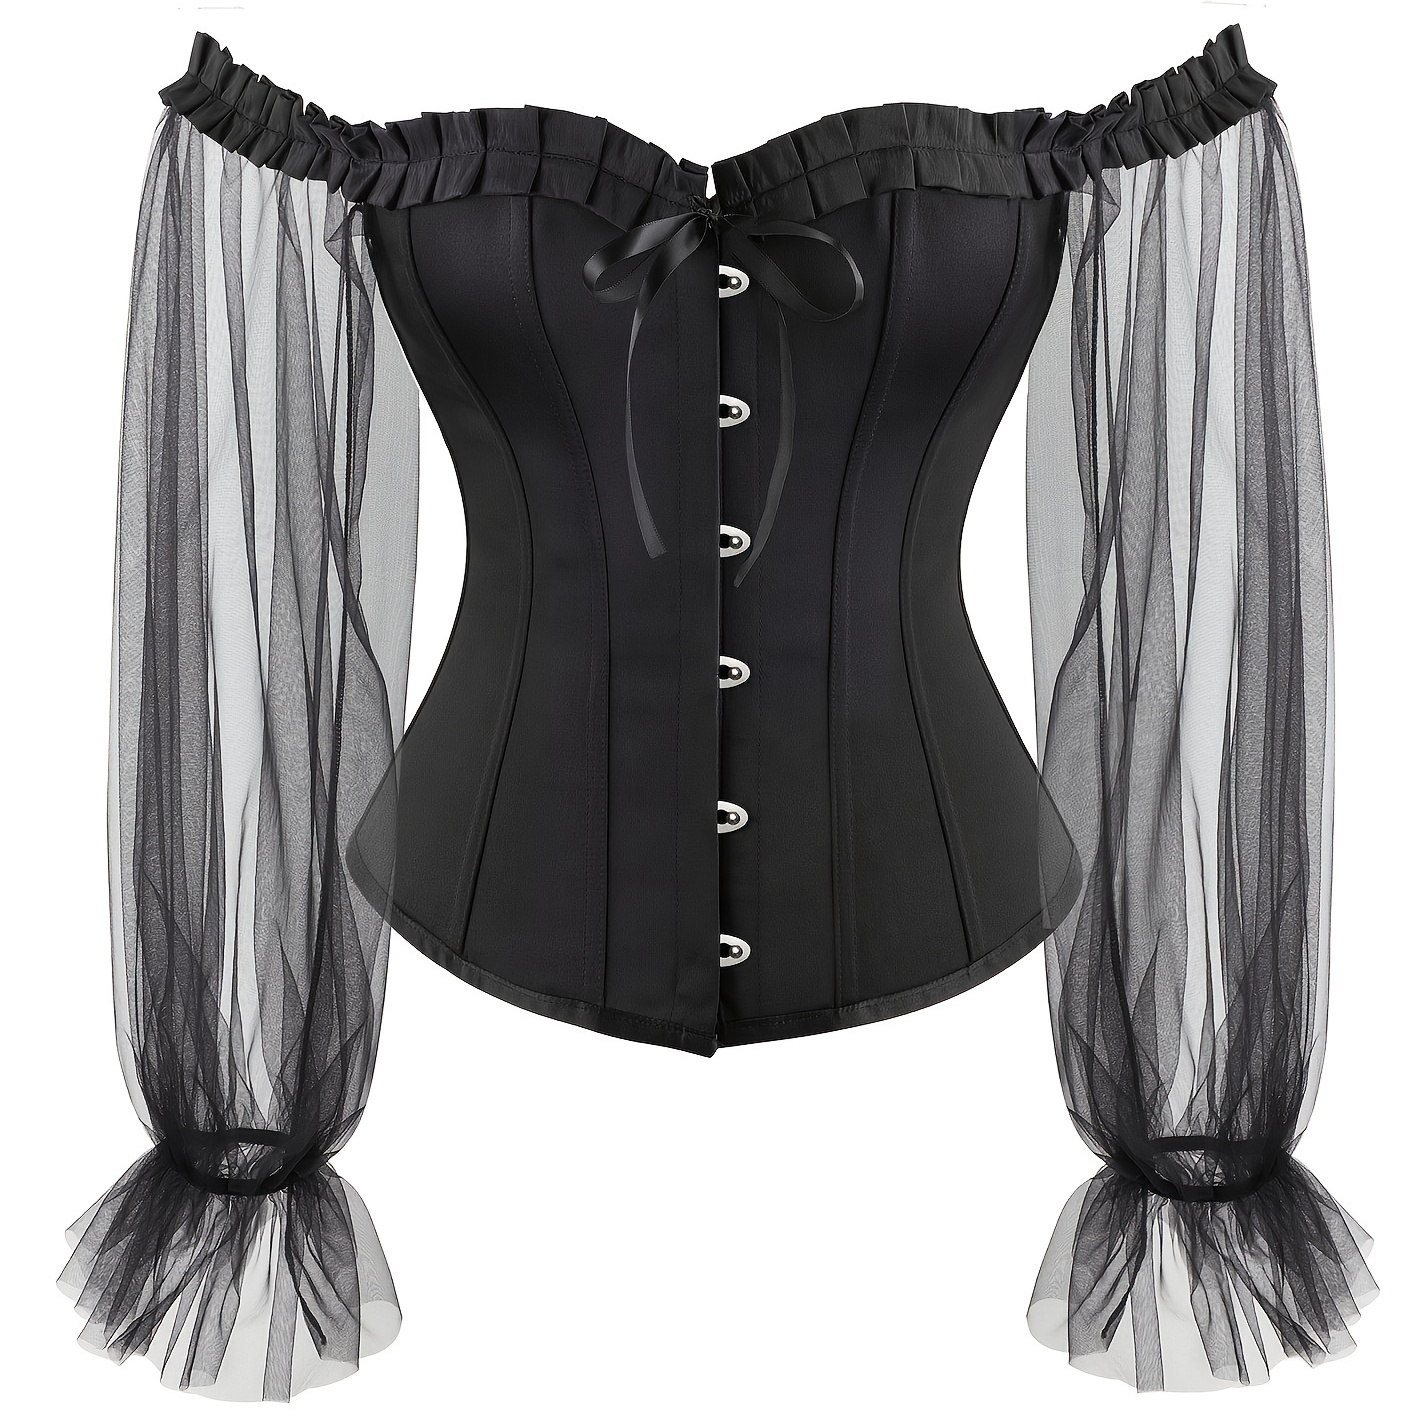 Off Shoulder Neck Corsets For Women Sheer Mesh Long Puff Sleeve Overbust Corset Gothic Lace-up Boned Bustier Tops Black